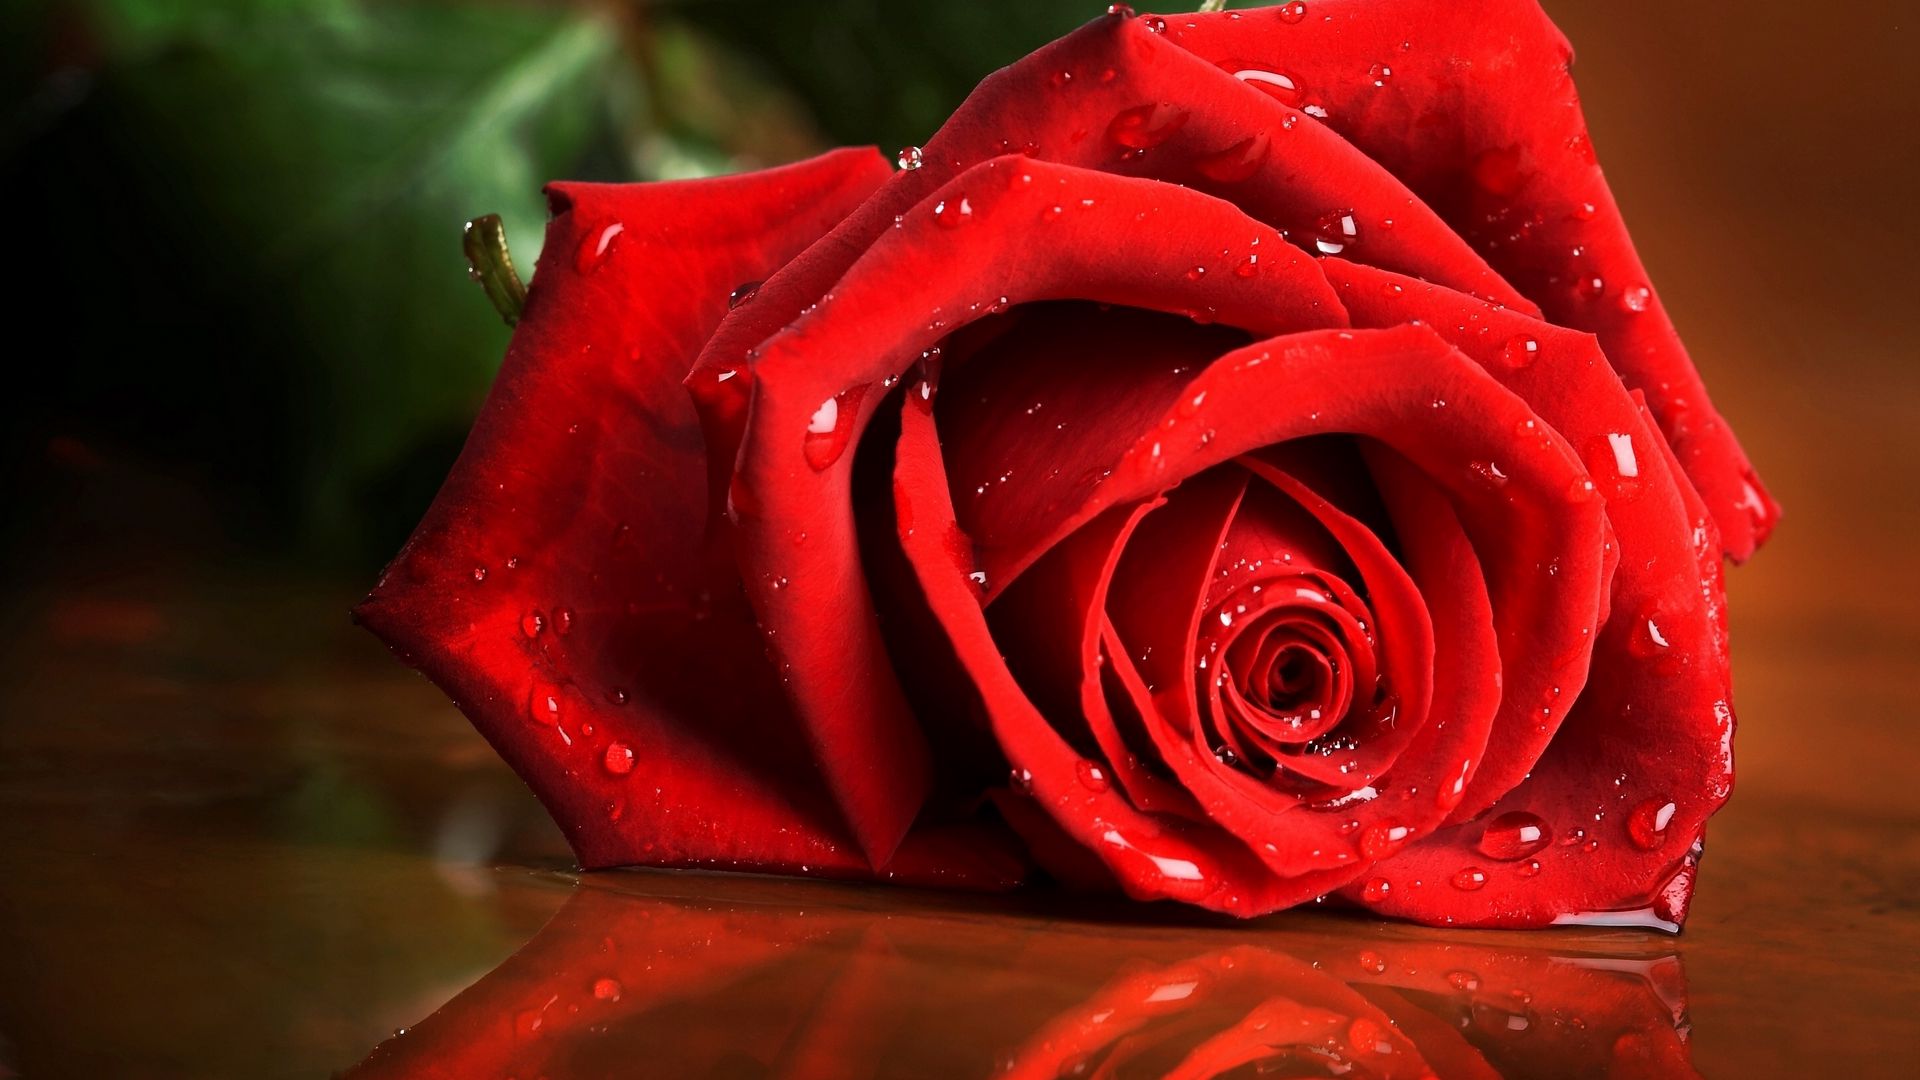 Download wallpaper 1920x1080 red rose, drops, rose full hd, hdtv, fhd, 1080p  hd background